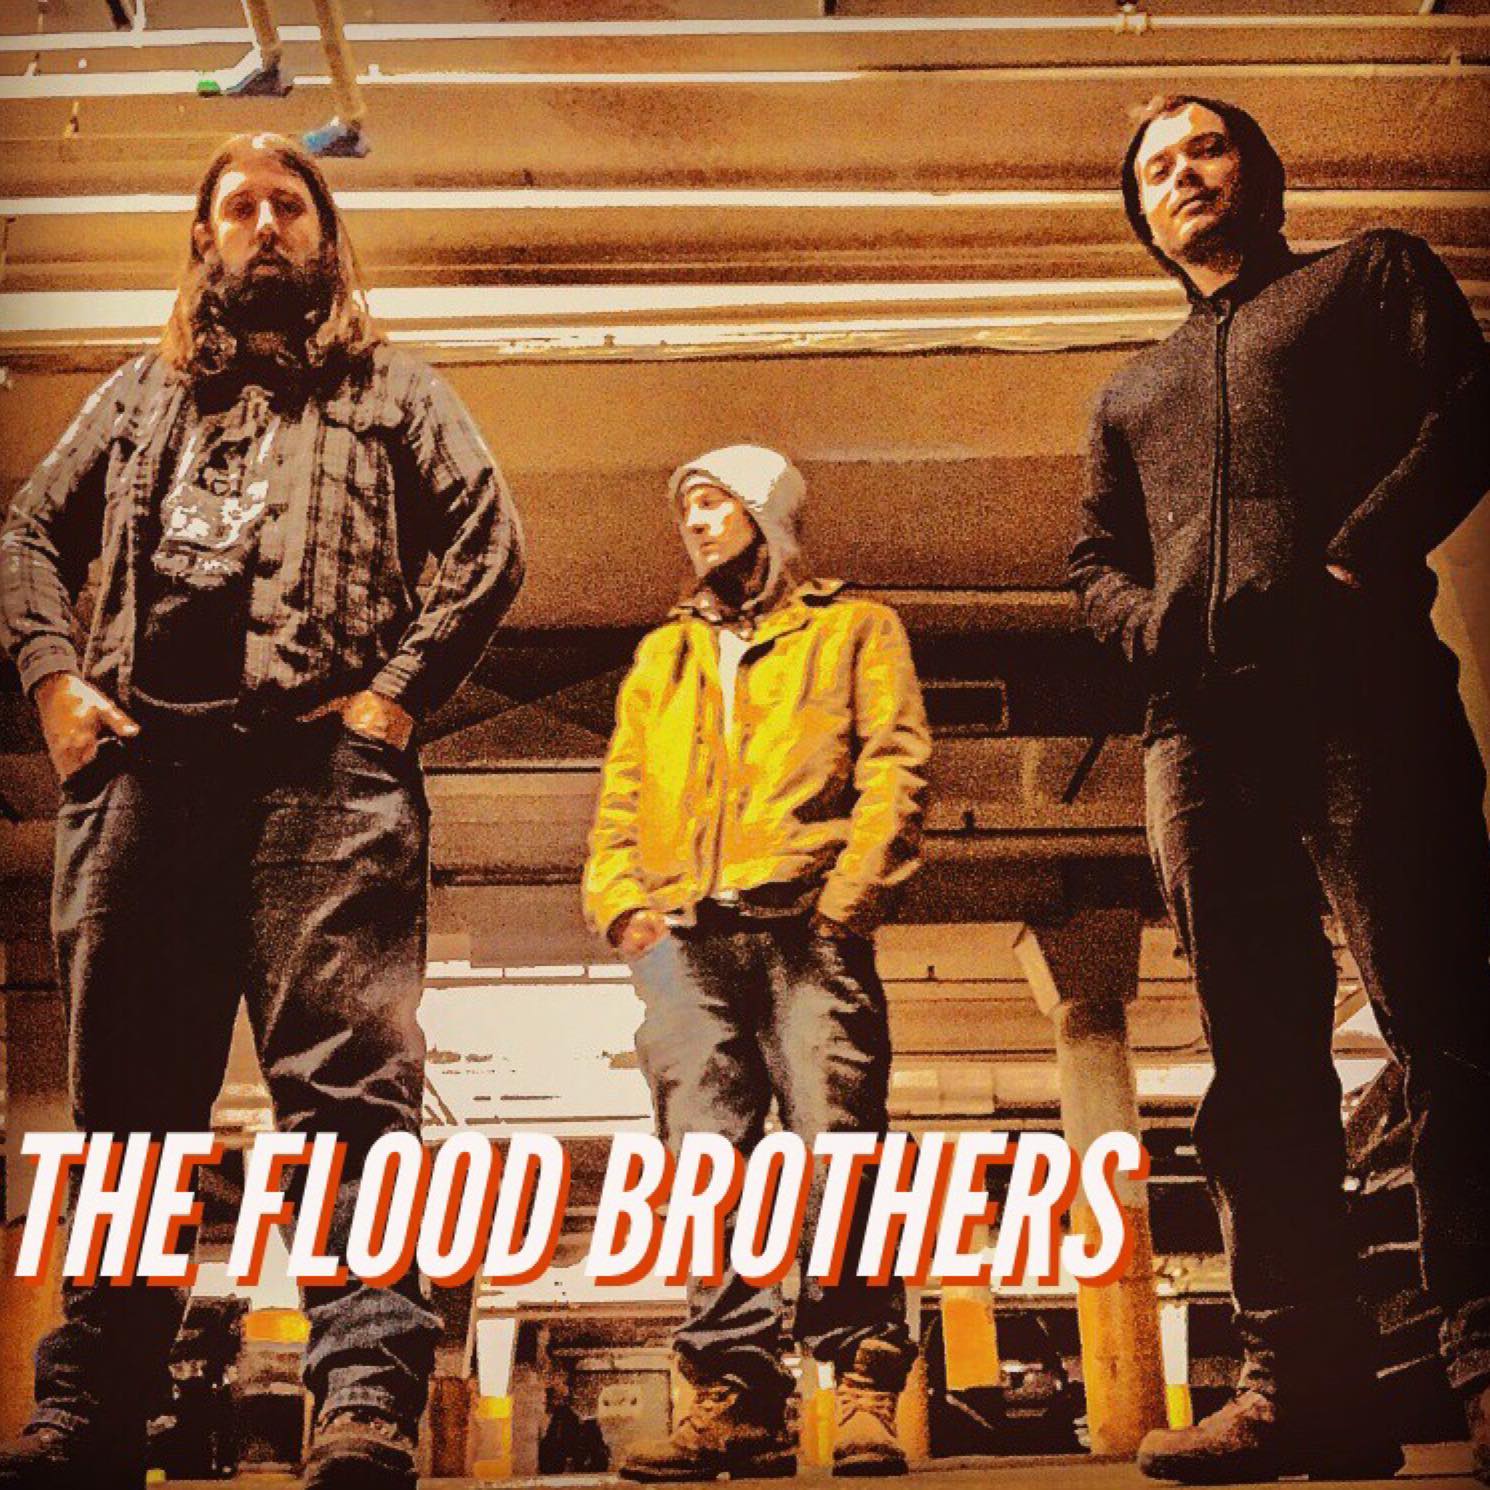 The Flood Brothers shake up The Mission Central Mo News